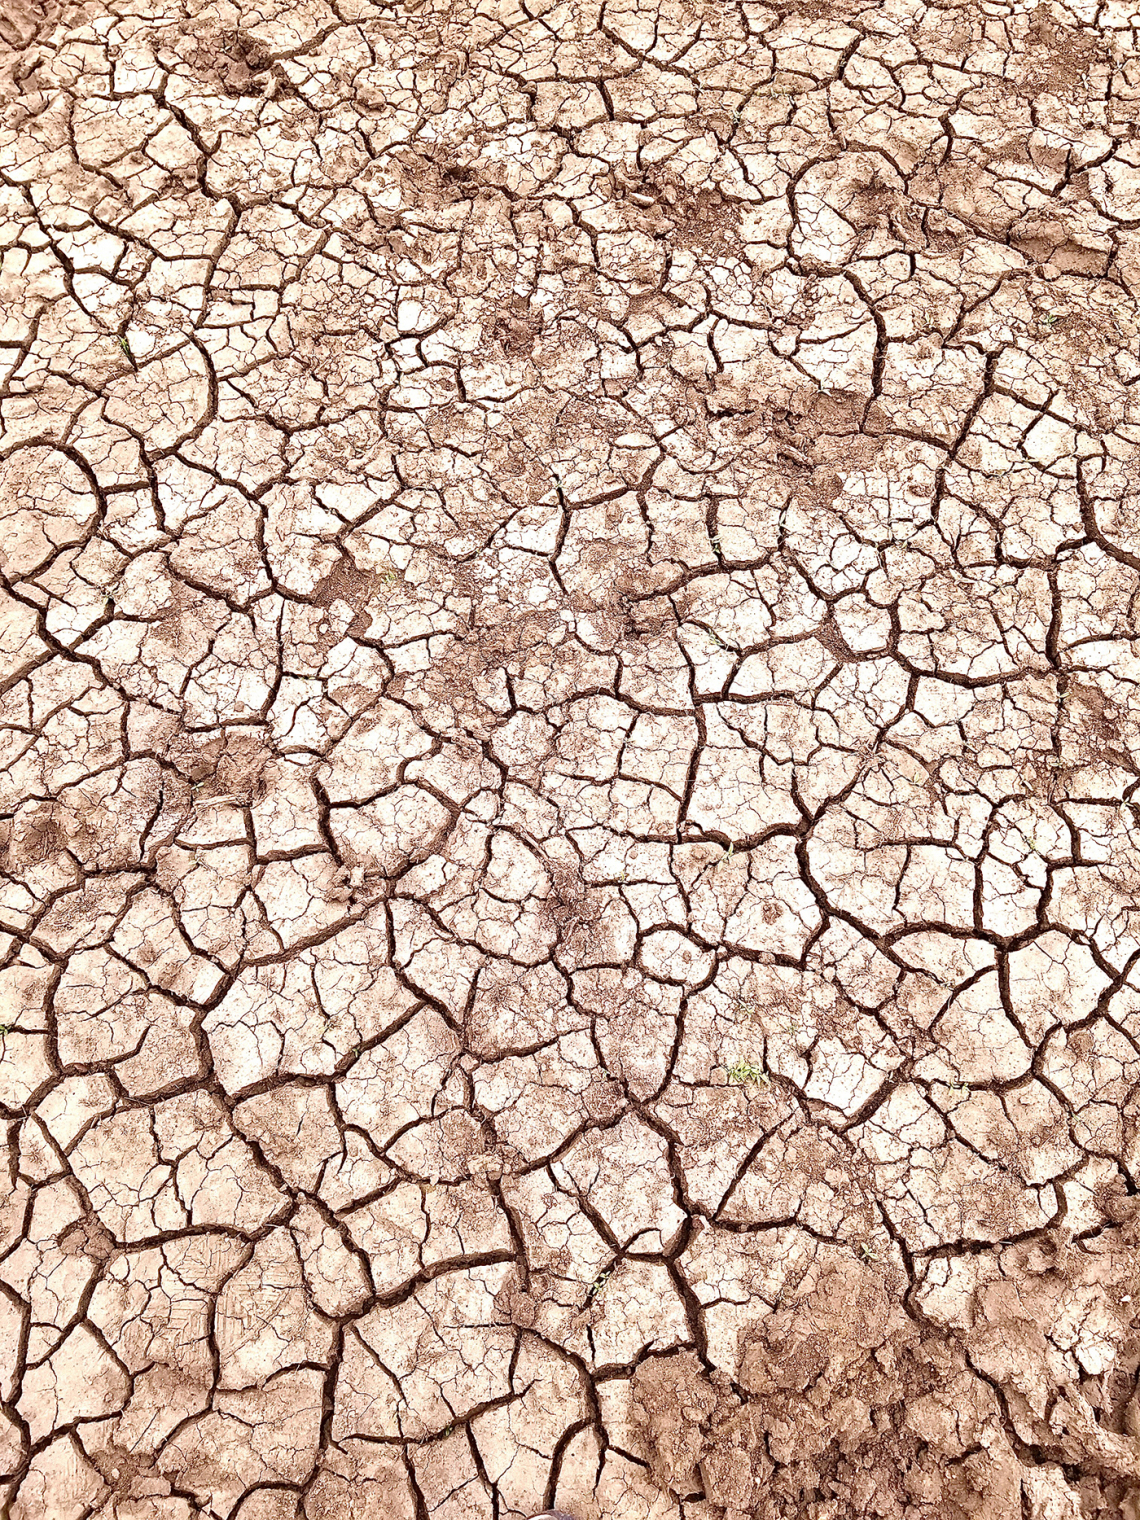 Rachael King - Drought in the Sitgreaves 2021